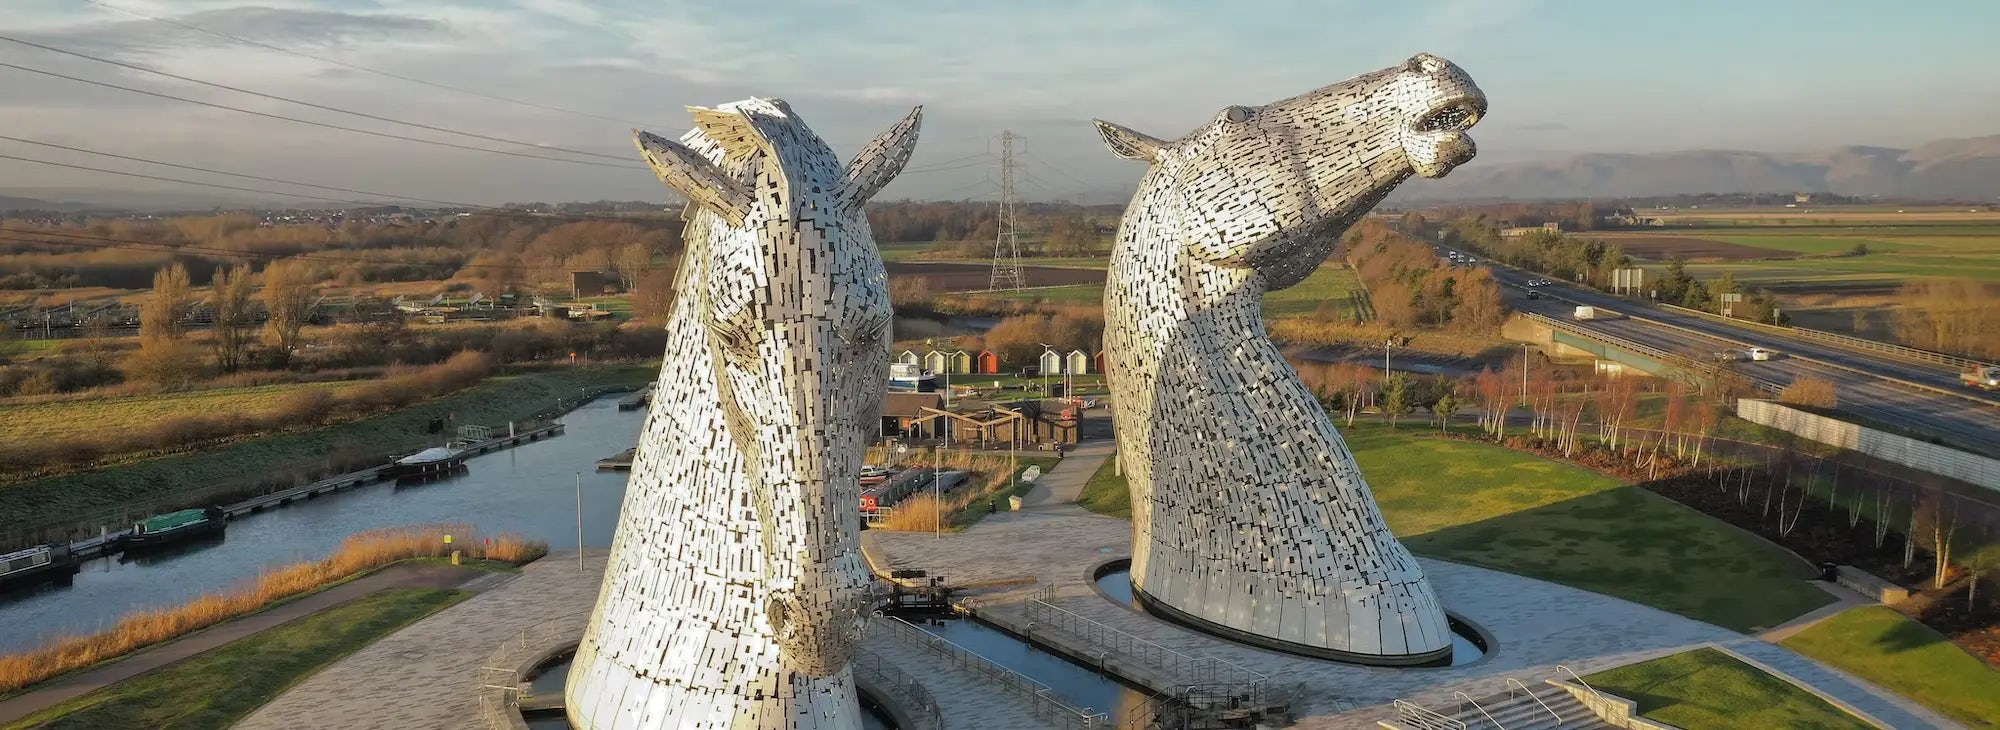 The Kelpies, near Stirling